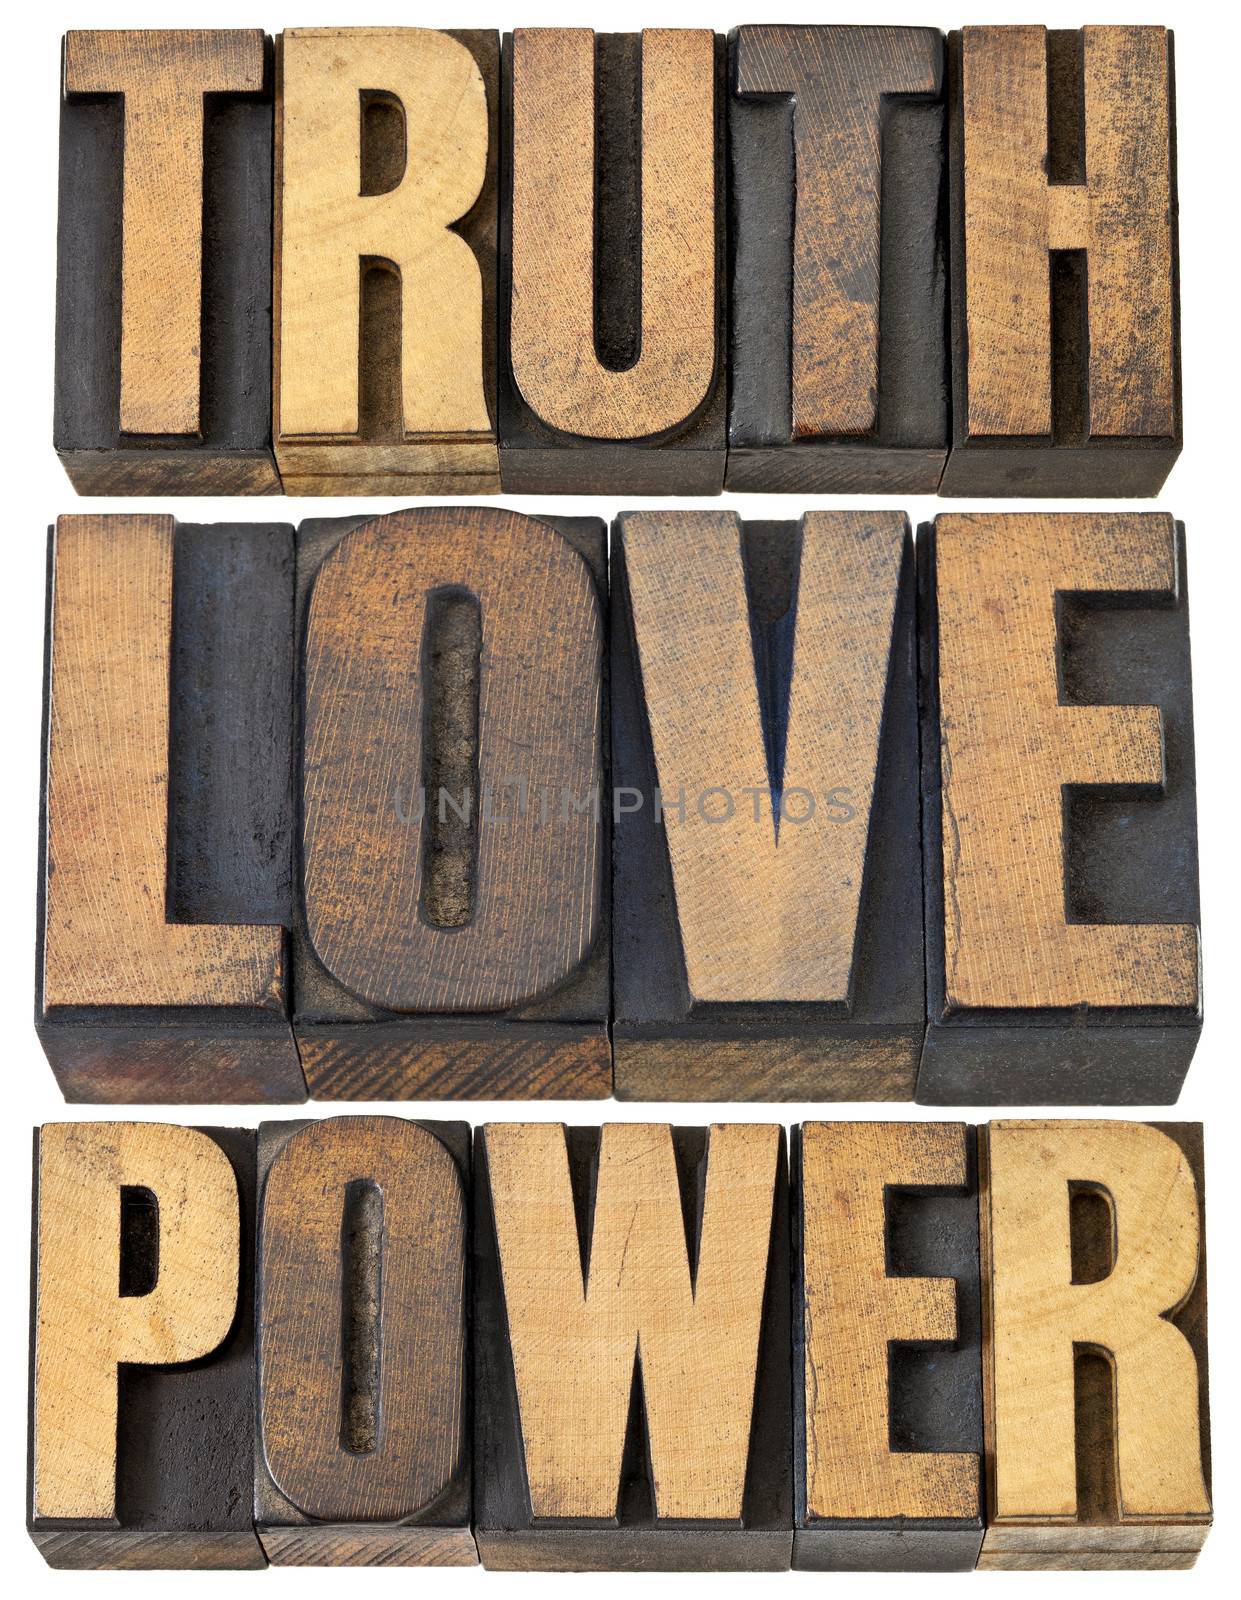 truth, love and power by PixelsAway